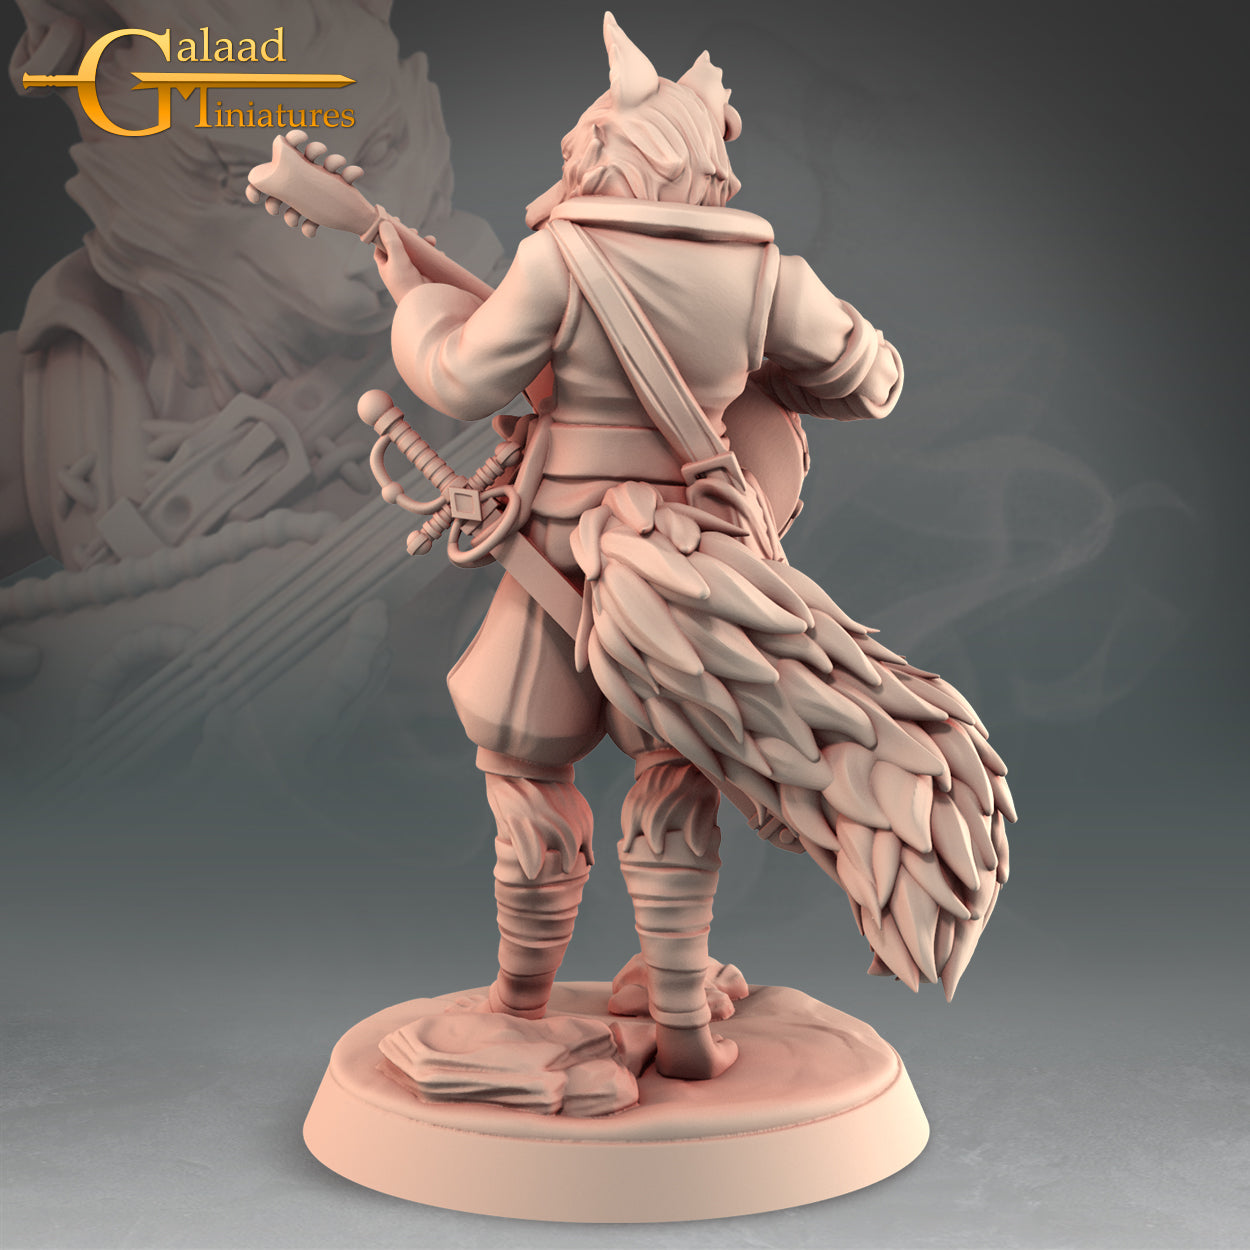 Kitsune Bard : For D&D Campaigns & Tabletop Games